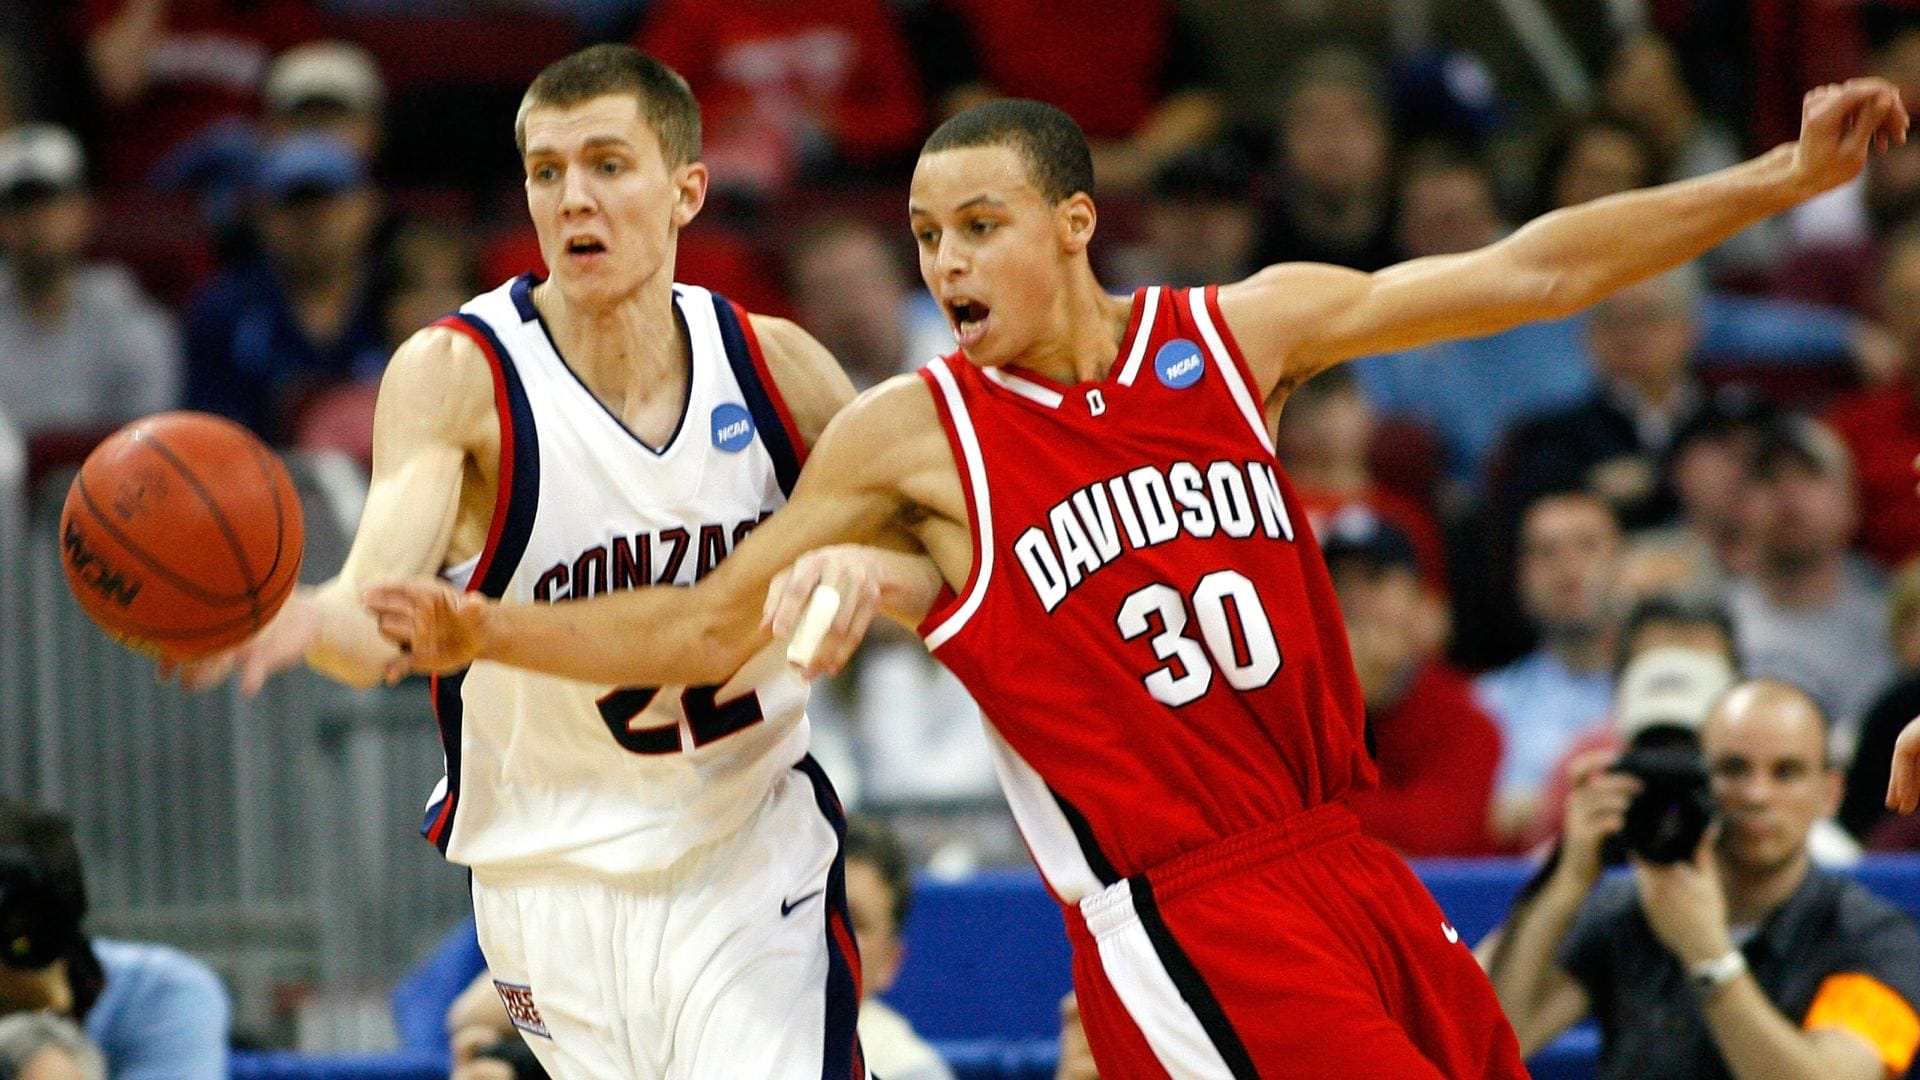 Stephen Curry #30 of the Davidson Wildcats reaches for a loose ball against Micah Downs #22 of the Gonzaga Bulldogs during the 1st round of the 2008 NCAA Men's Basketball Tournament on March 21, 2008 at RBC Center in Raleigh, North Carolina. (Photo by Kevin C. Cox/Getty Images)